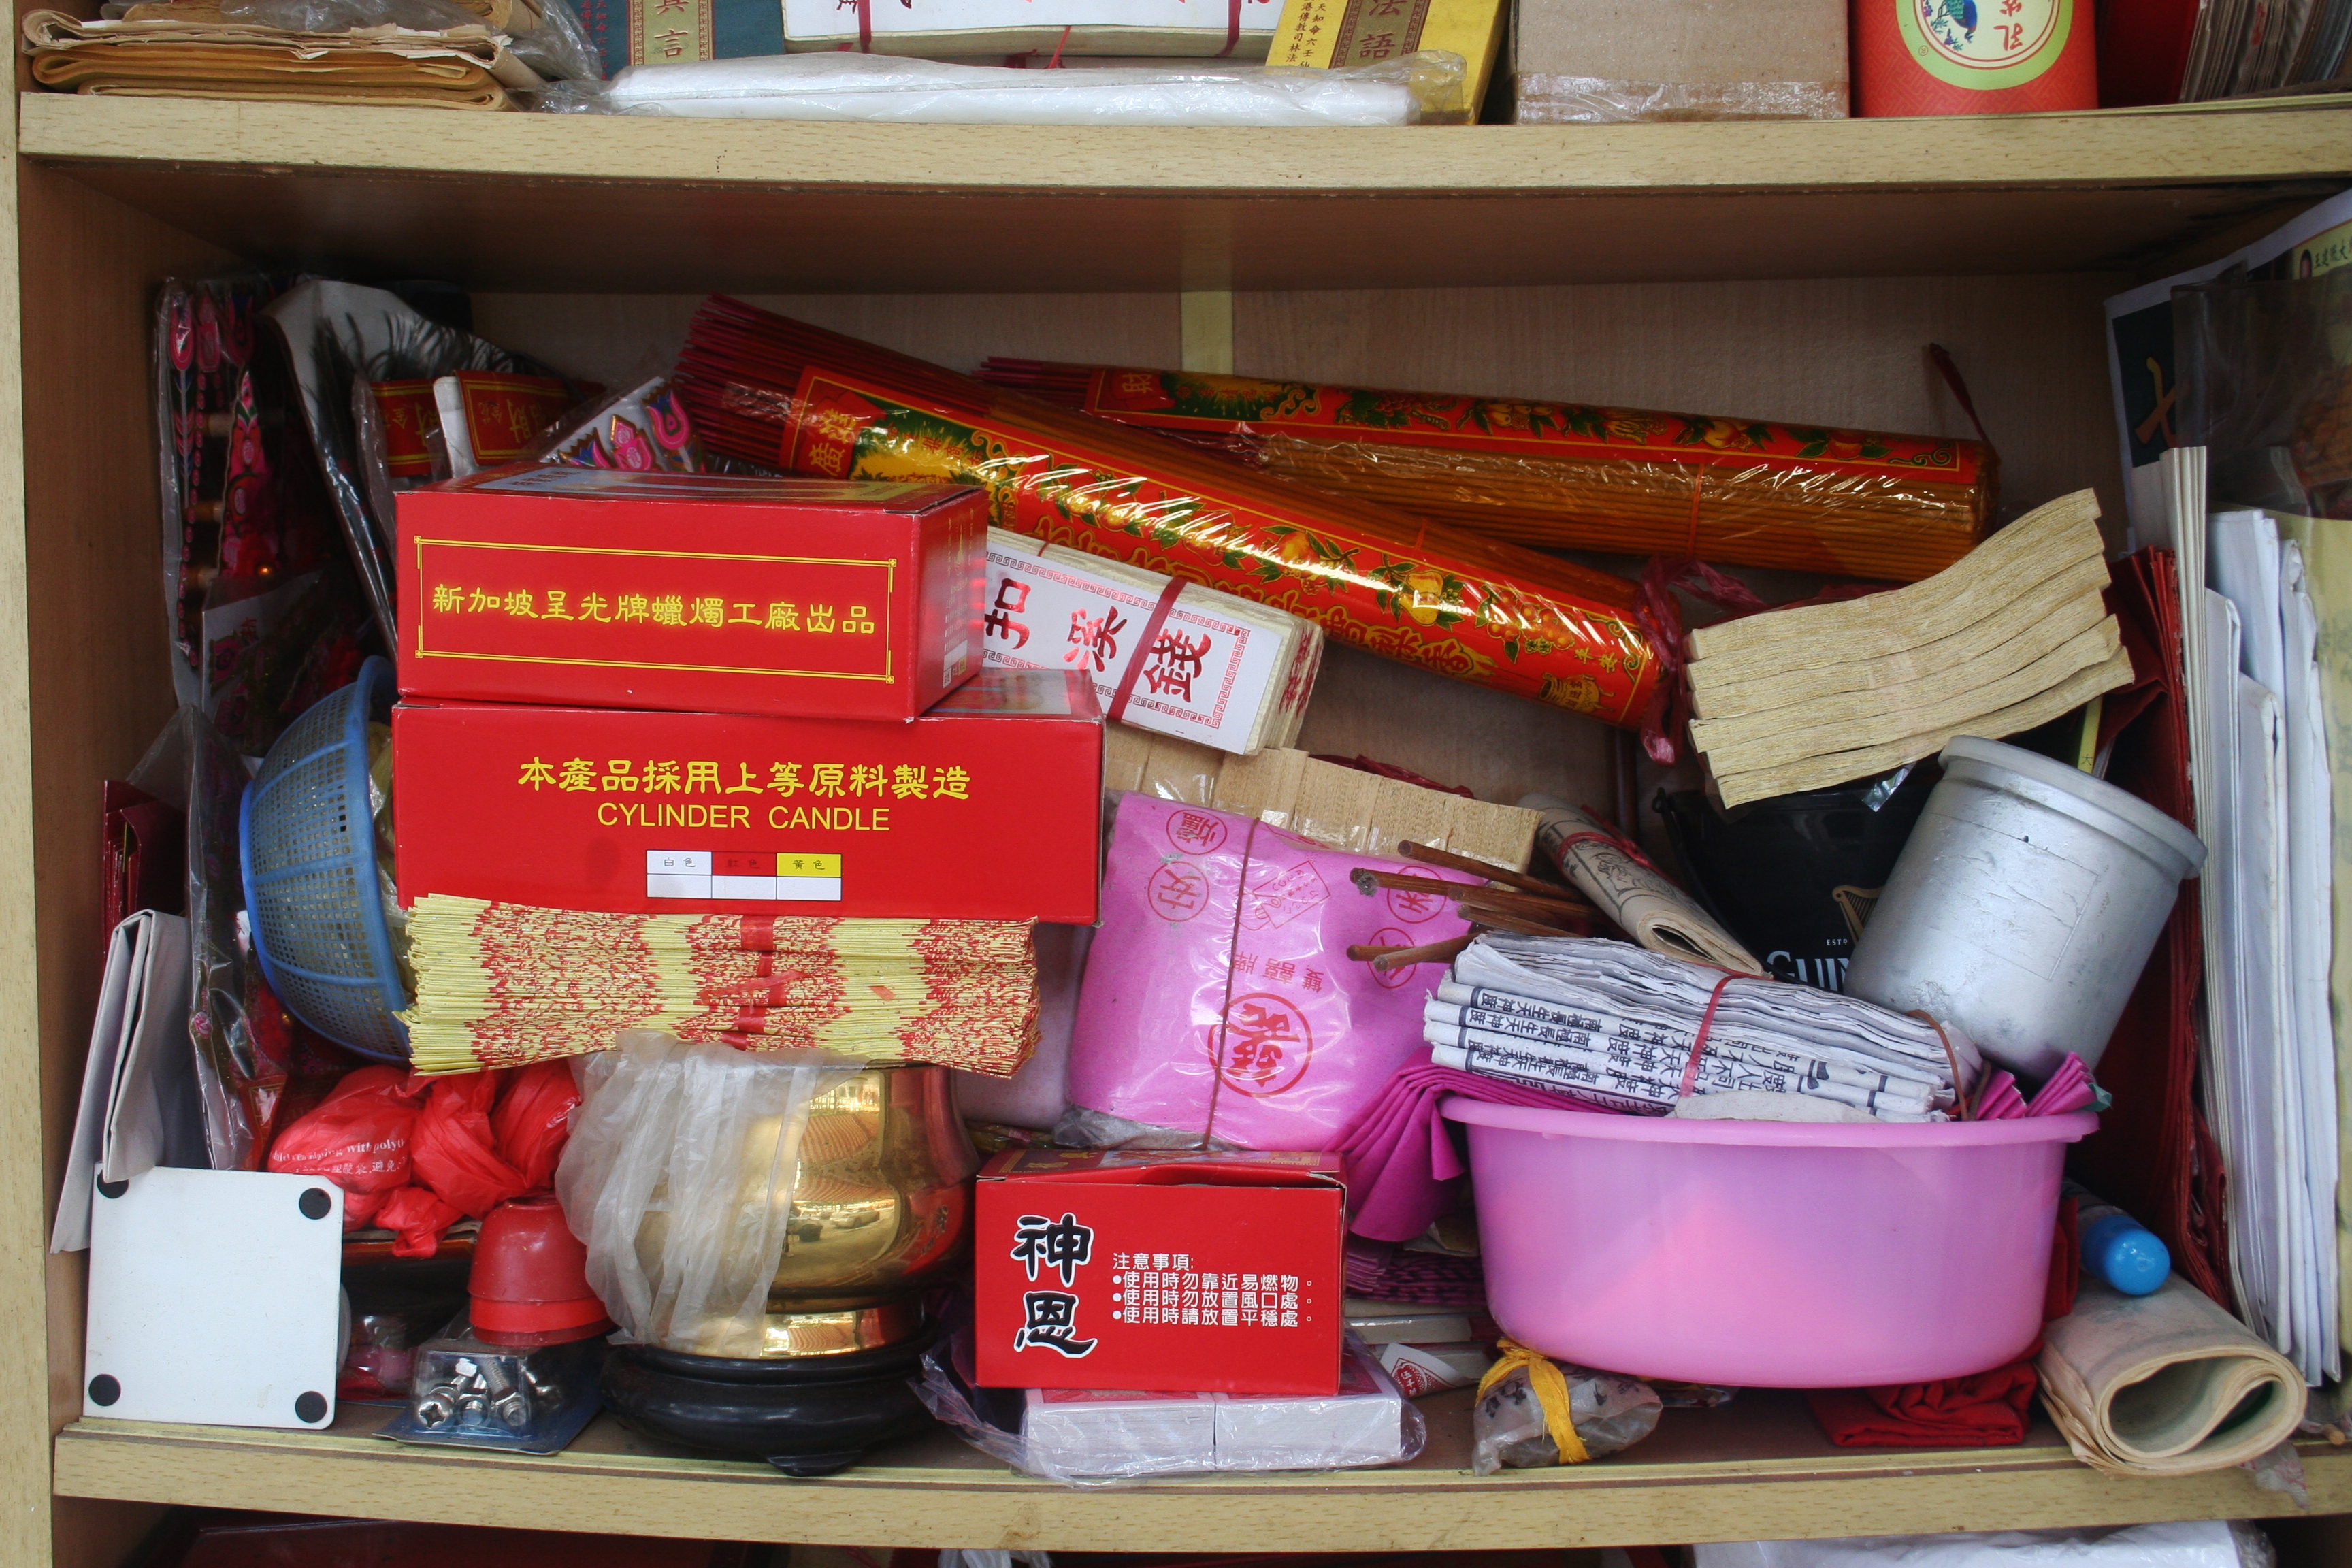 RED: Joss sticks, fake paper money, candle cylinders various other offerings 